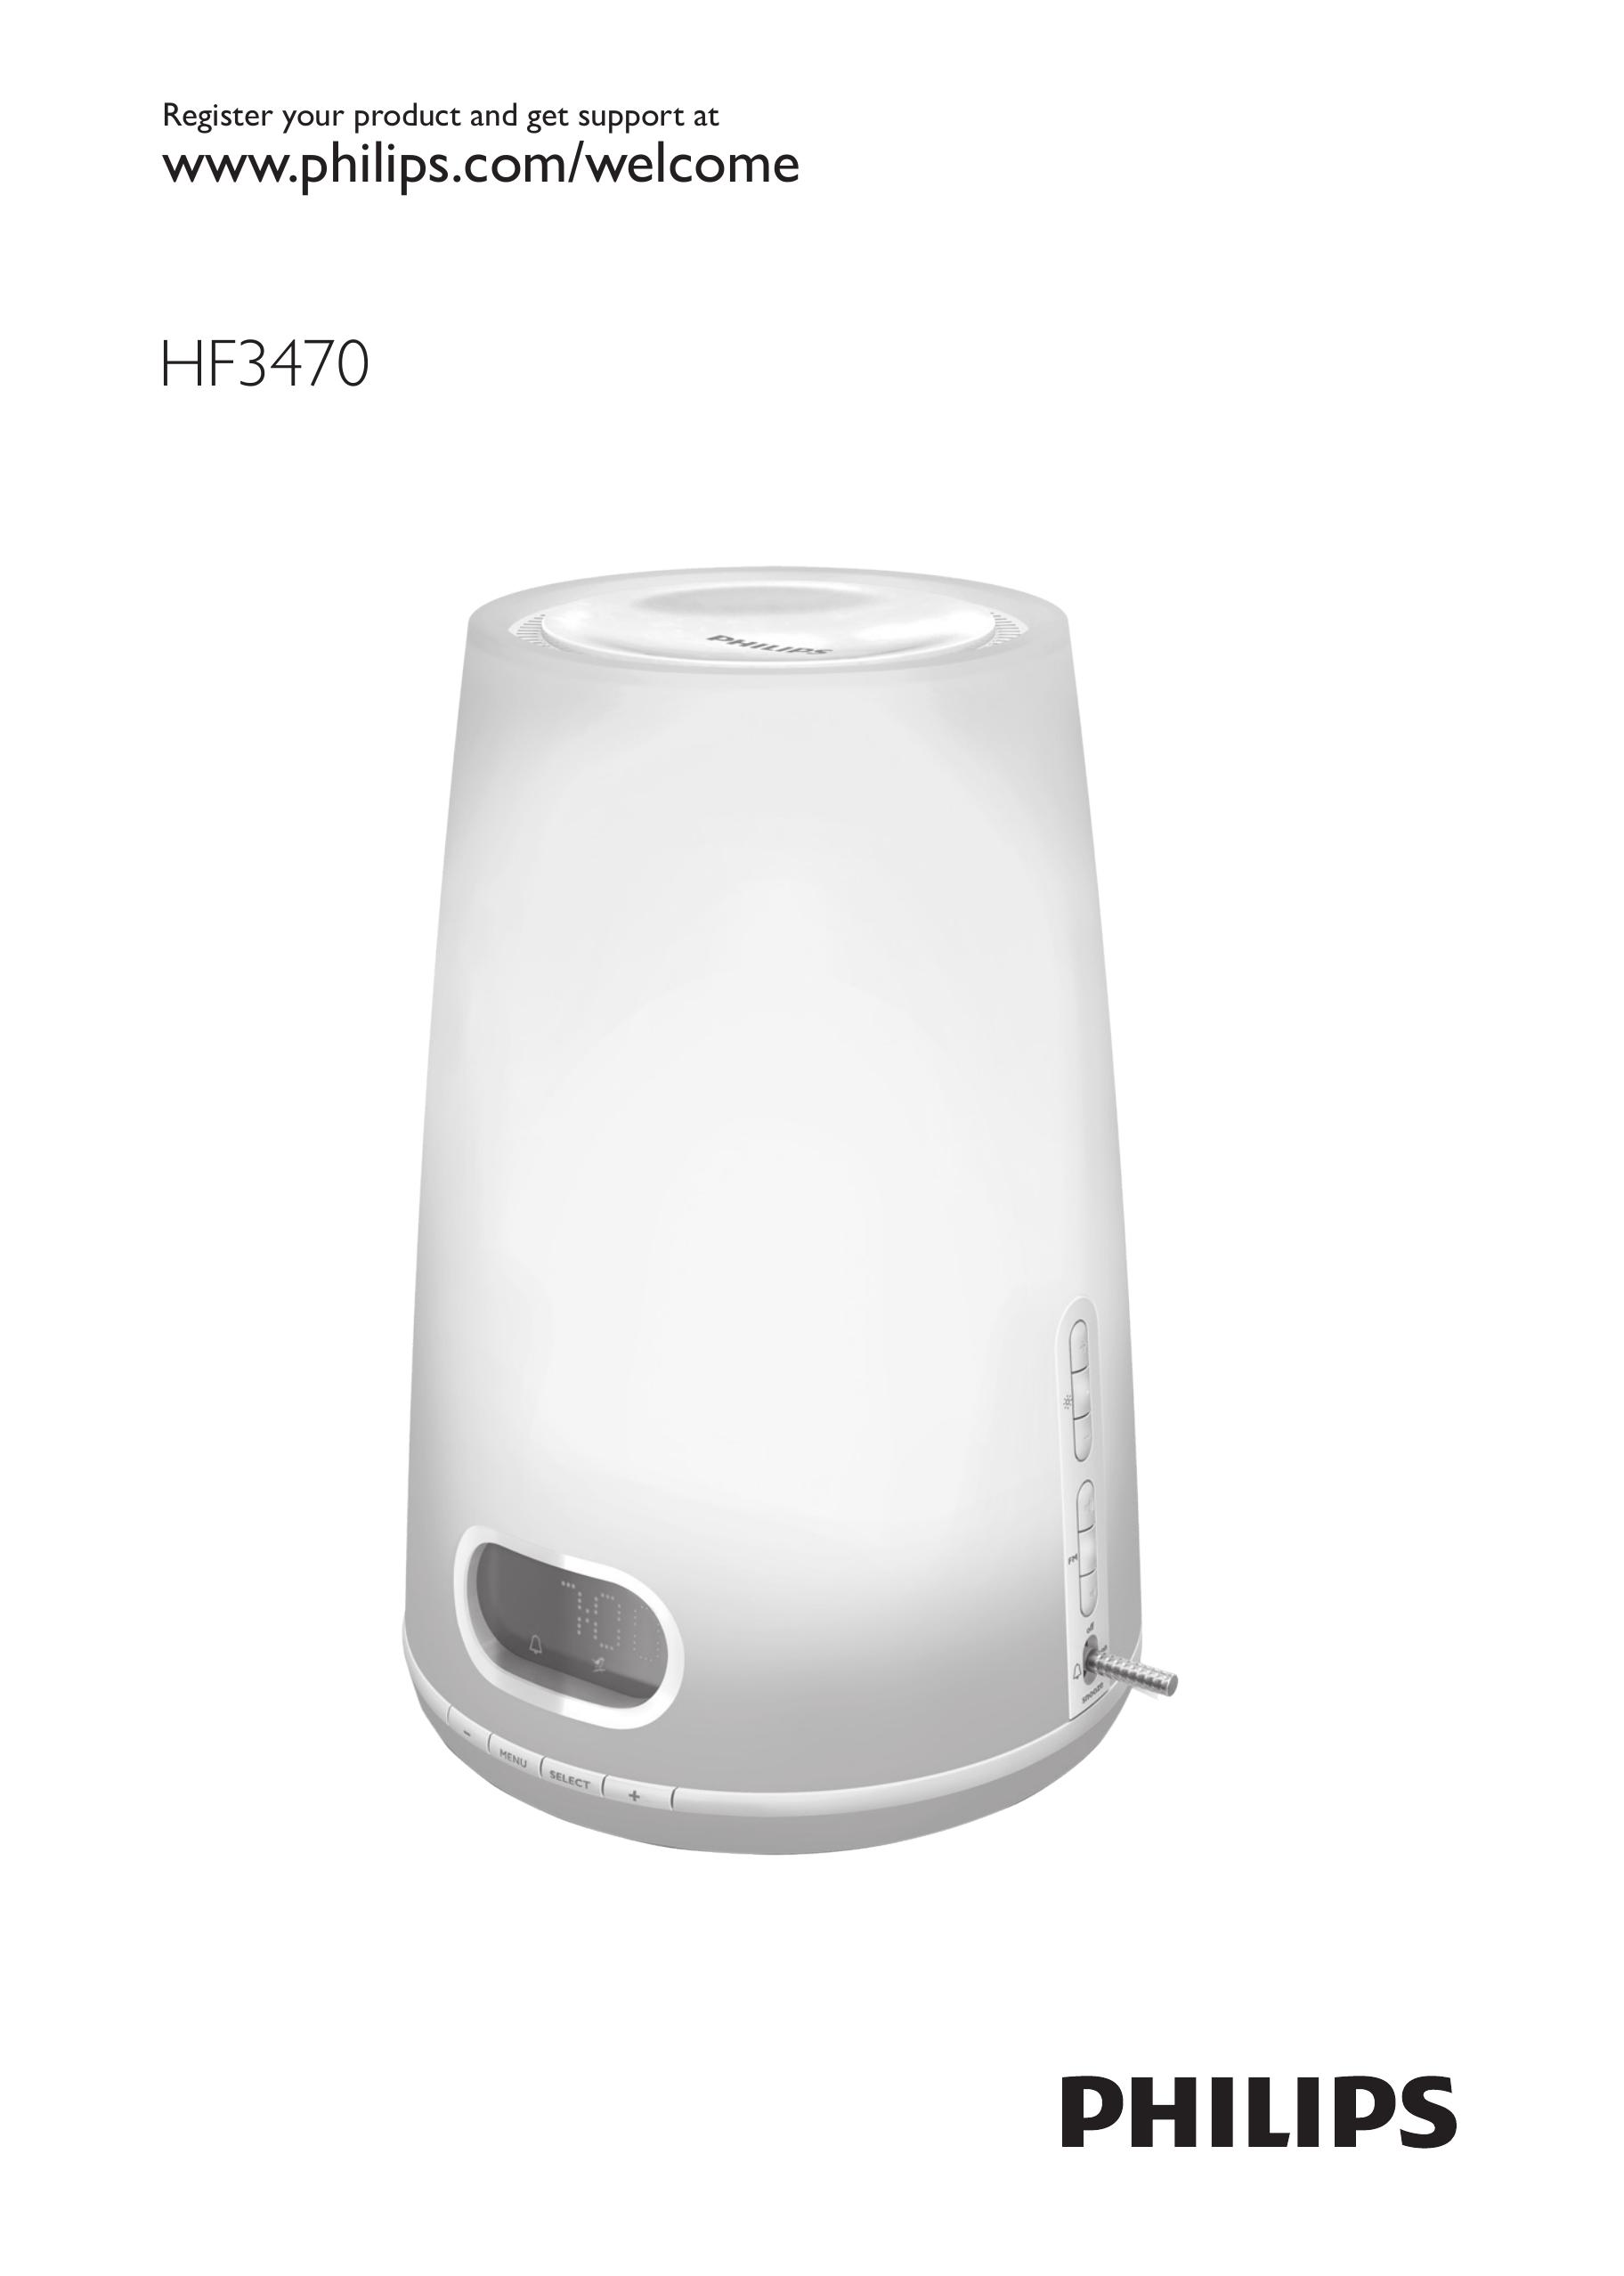 Philips HF3470 Light Therapy Device User Manual